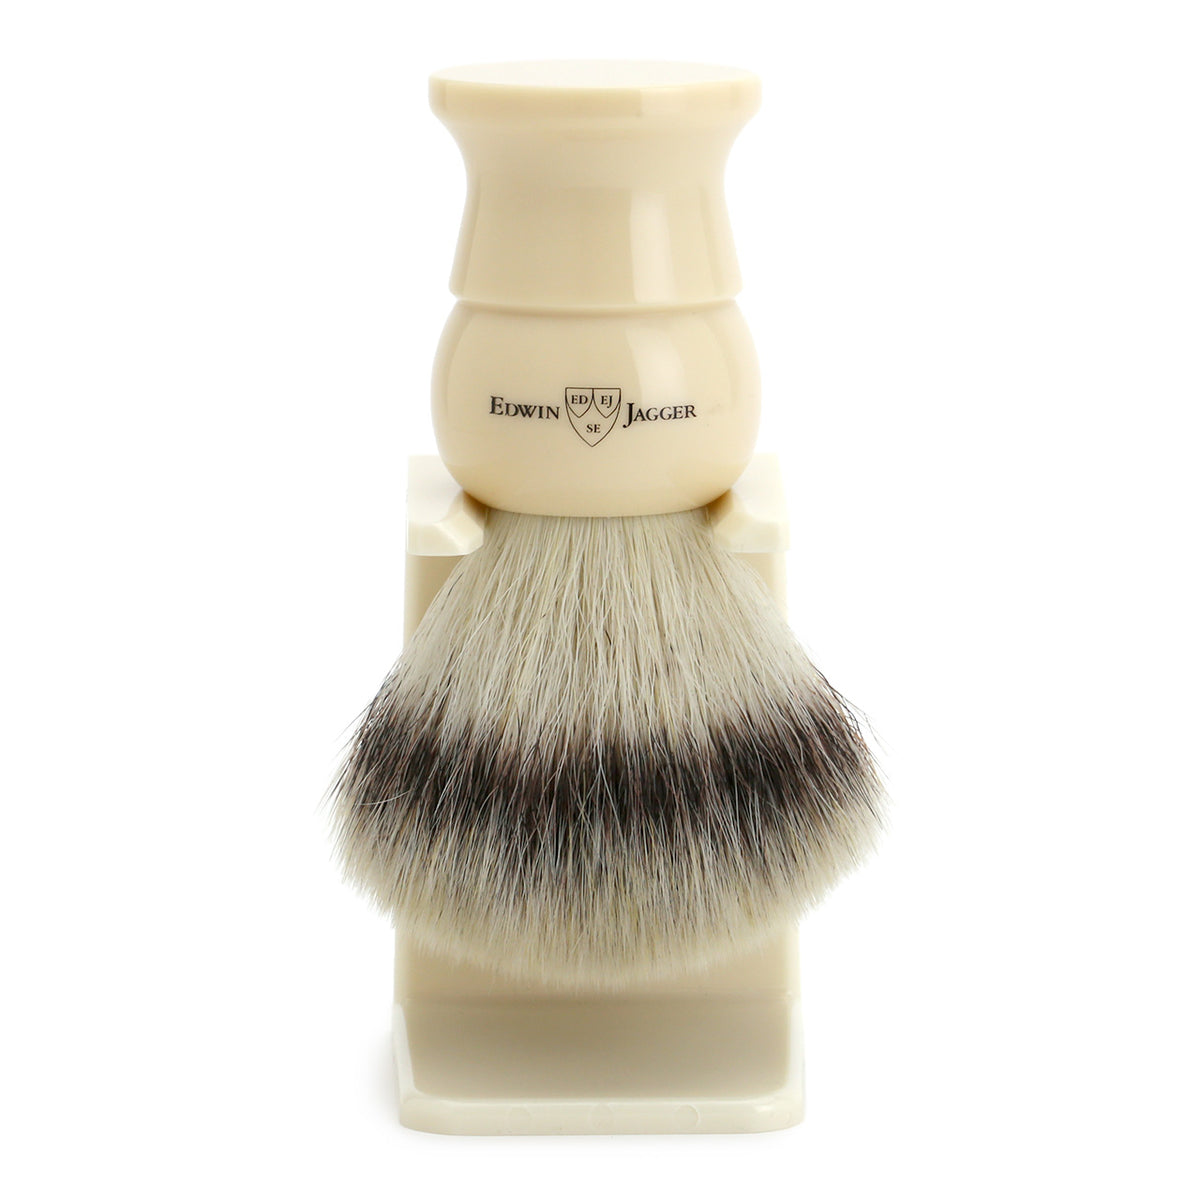 Edwin Jagger Imitation Ivory Shaving Brush Synthetic Silver Tip with Drip Stand - Extra Large